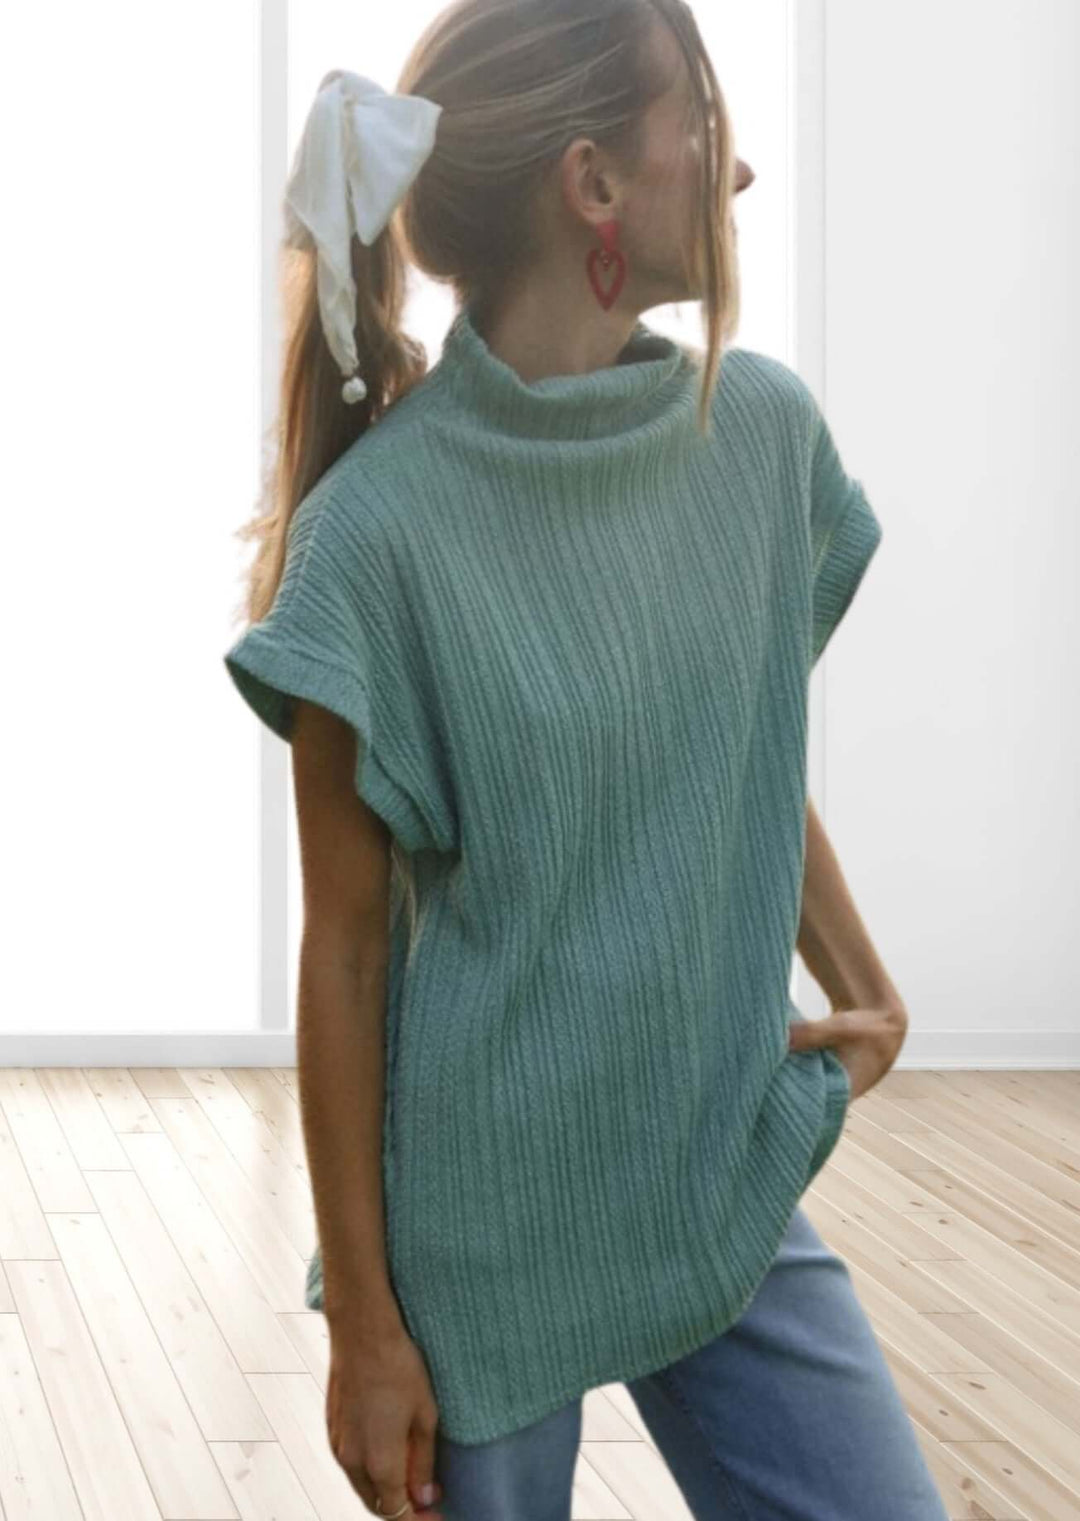 Made in USA Women's Mock Neck Soft Knit Top Sleeveless Drop Shoulder Sweater Vest with Side Slits in Teal | Classy Cozy Cool Women's Made in America Boutique